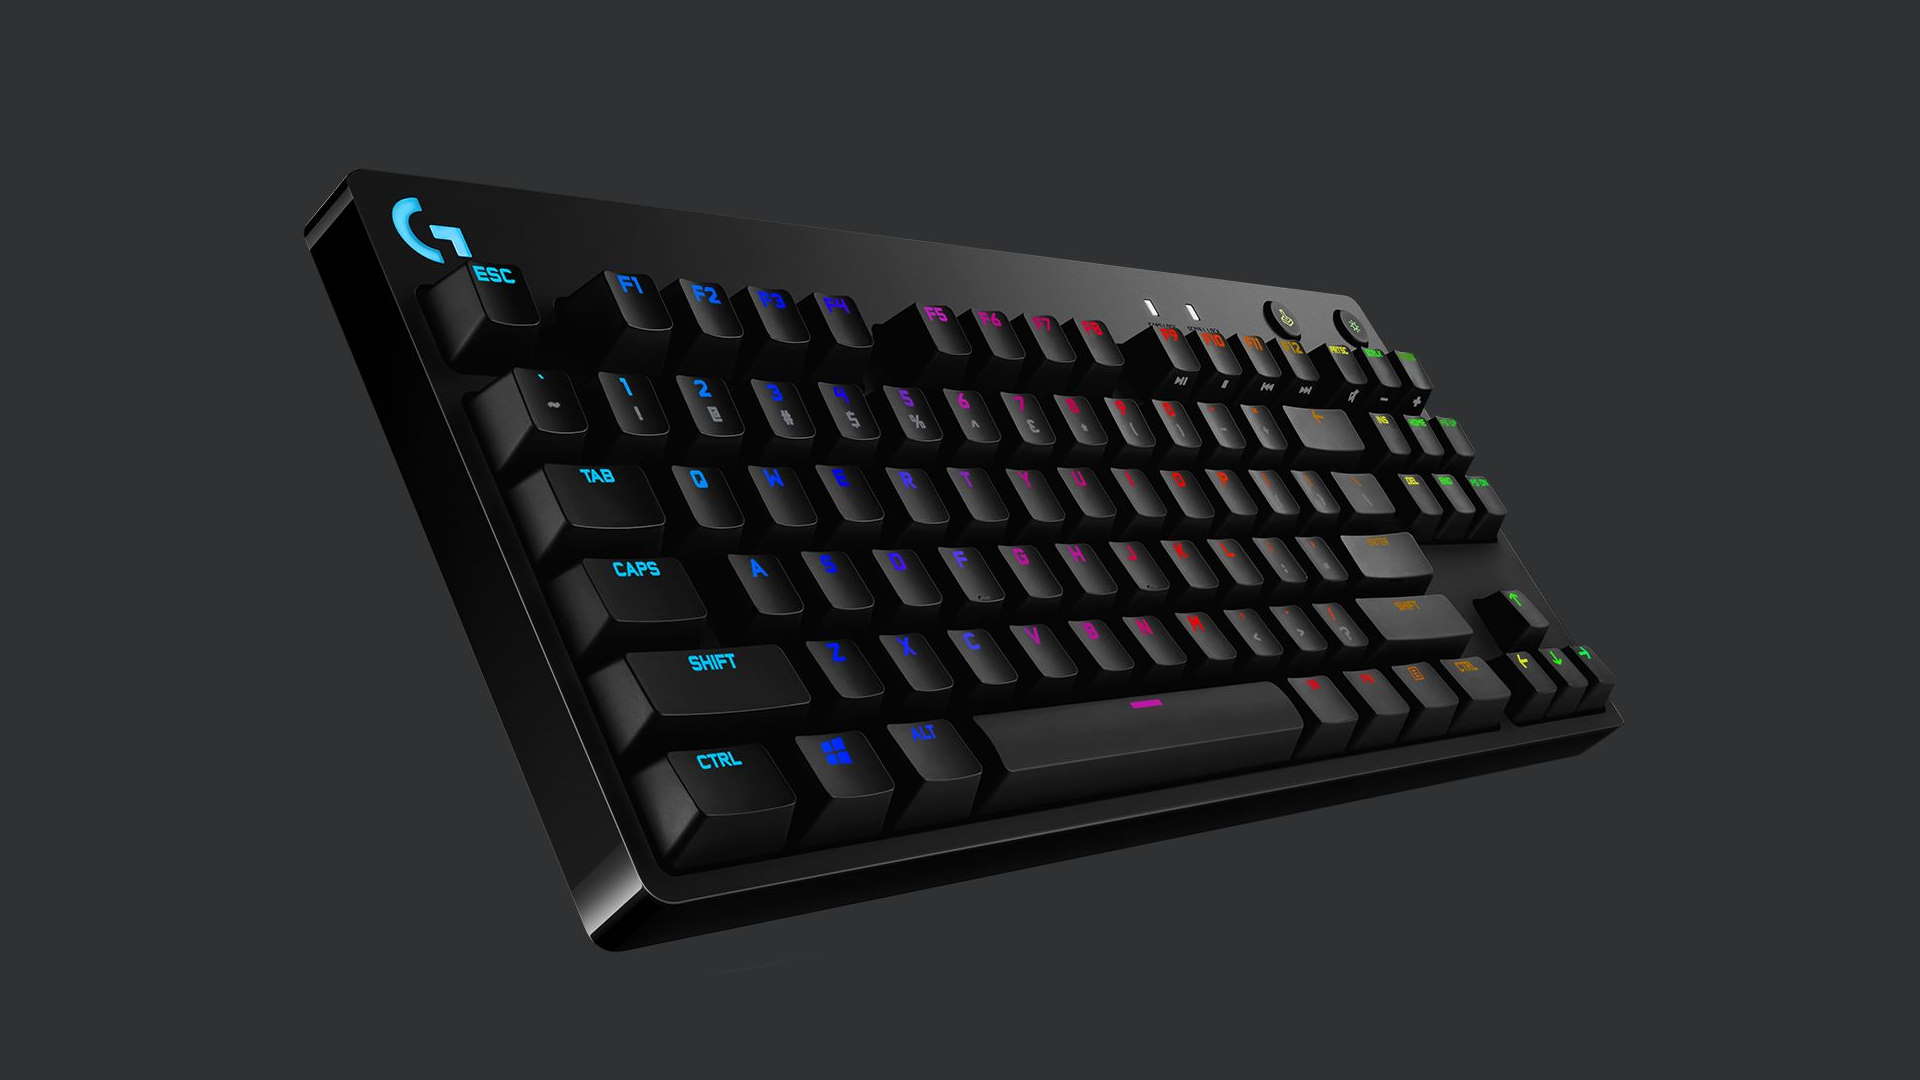 Logitech G Pro X gaming keyboard review – a compact board with a